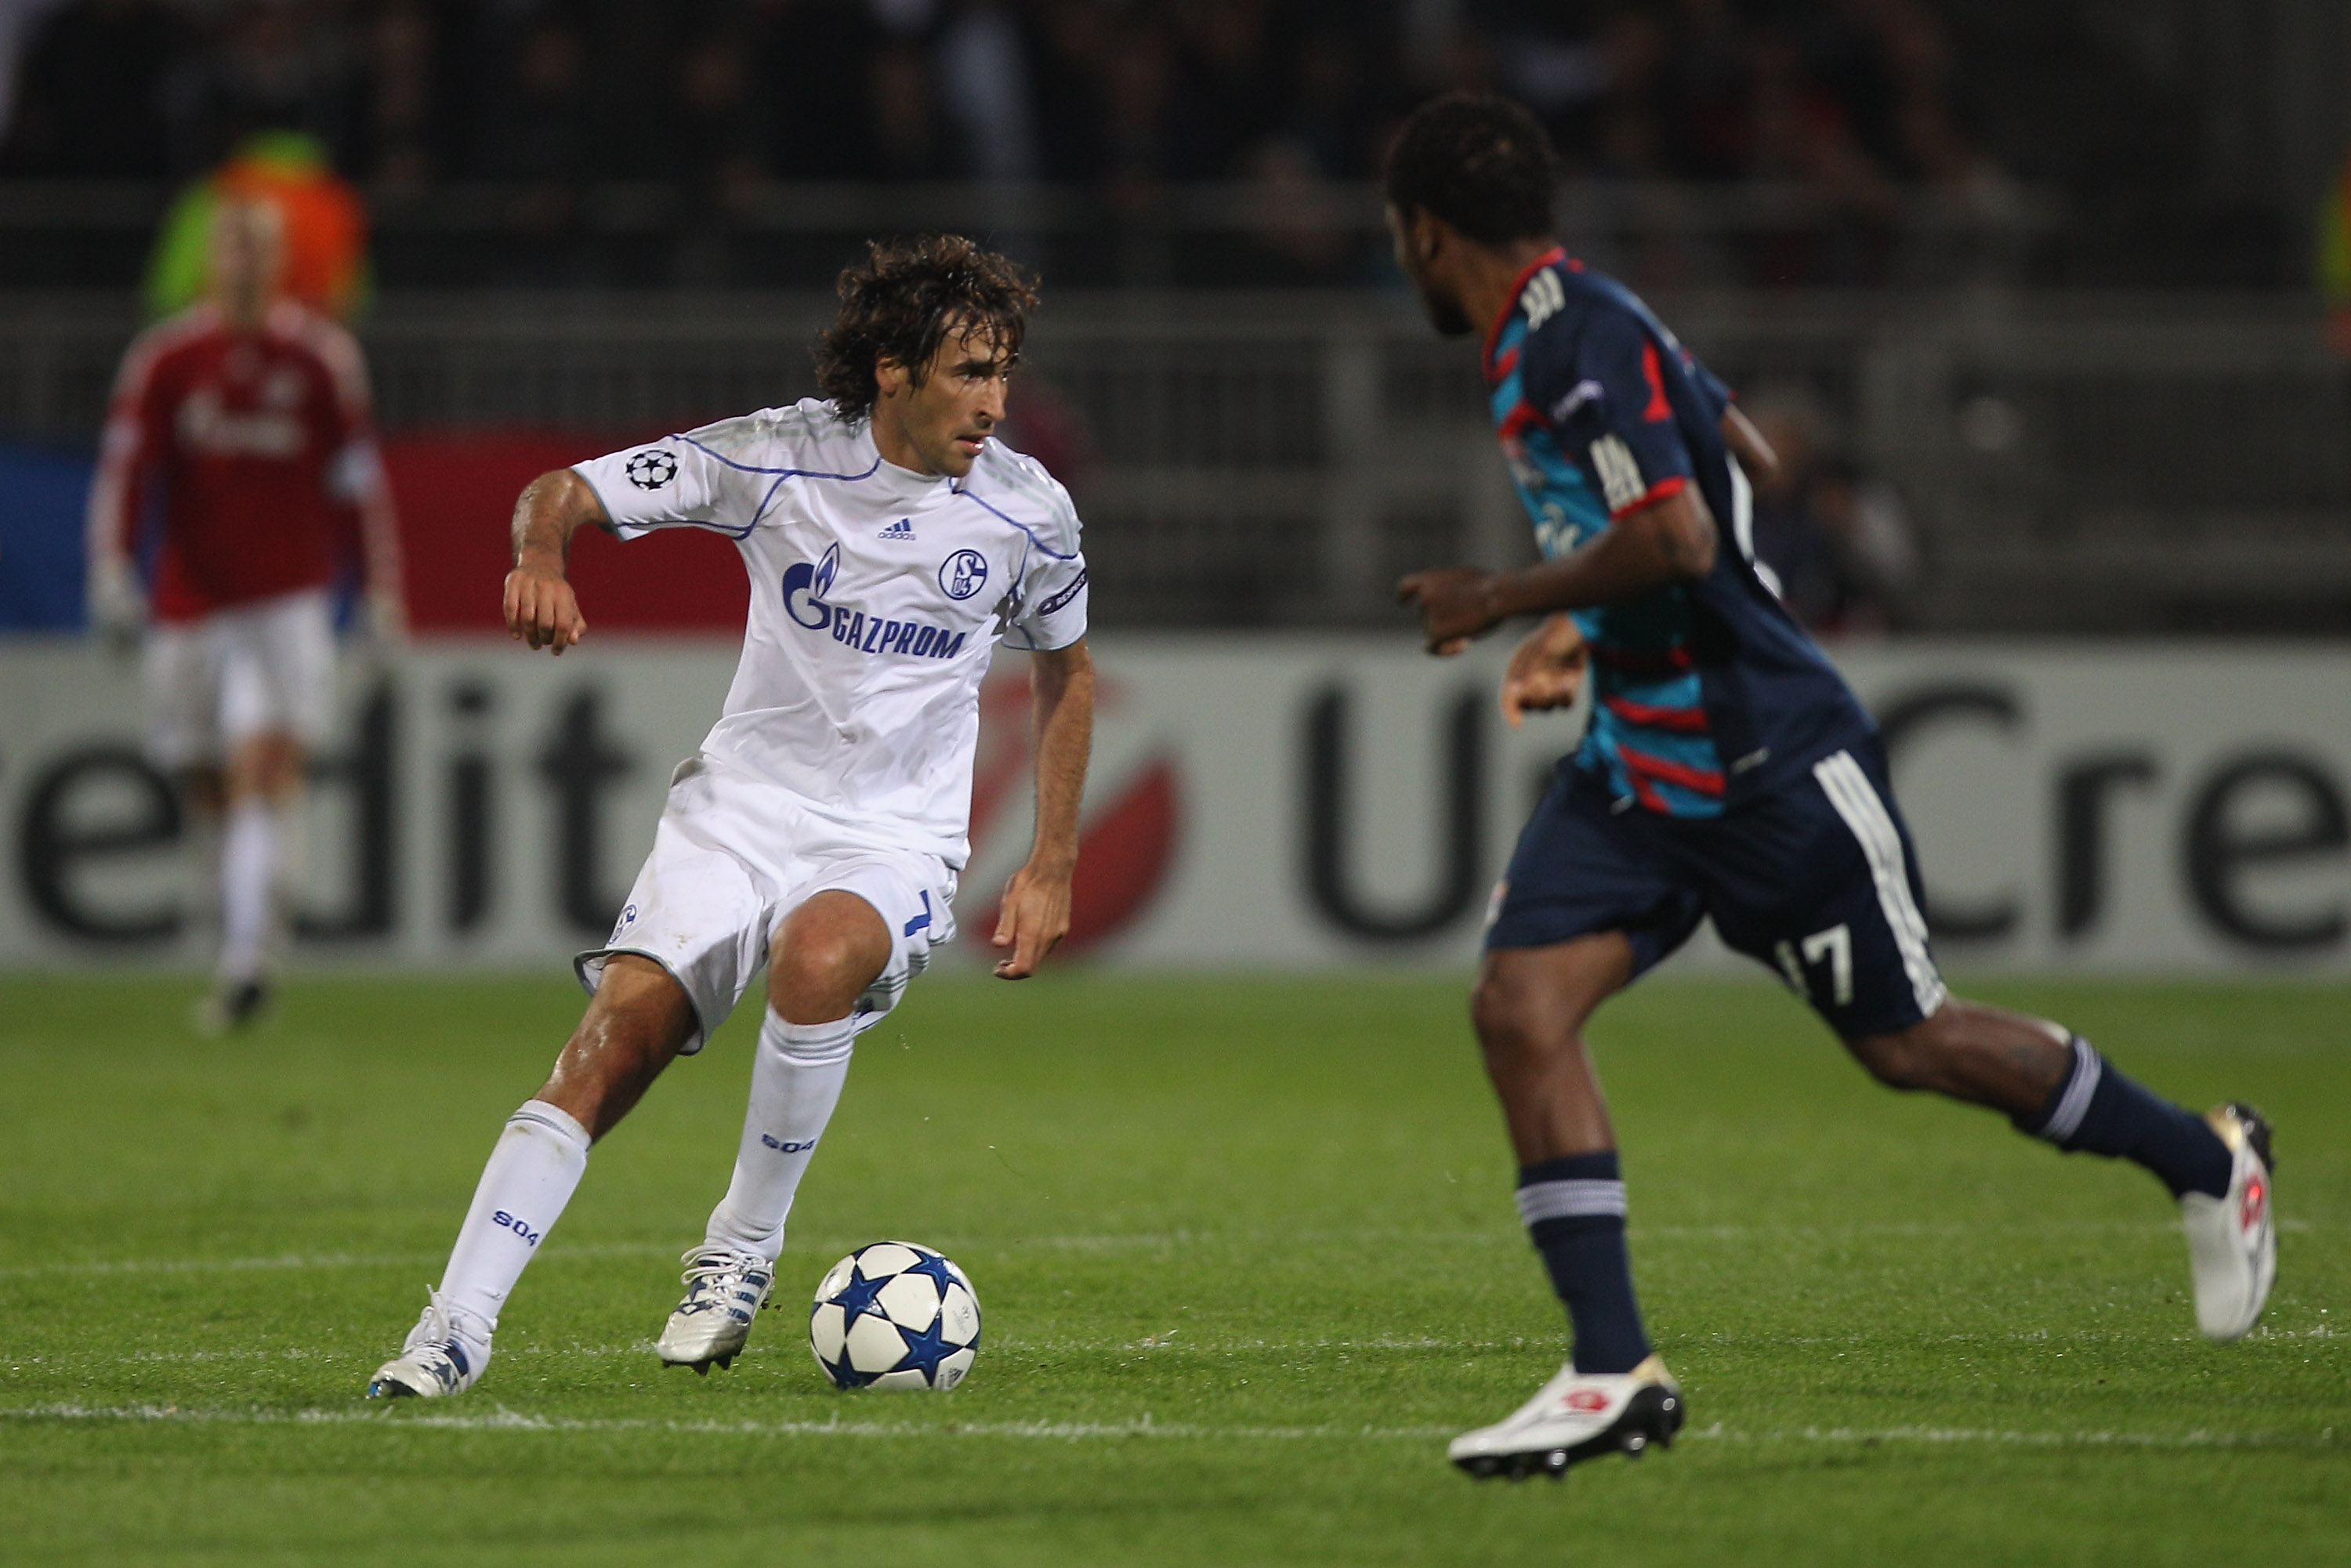 LYON, FRANCE - SEPTEMBER 14:  Raul Gonzalez (l) of Schalke during the UEFA Champions League Group B match between Olympique Lyonnais and FC Schalke 04 at the Stade de Gerland on September 14, 2010 in Lyon, France.  (Photo by Michael Steele/Getty Images)